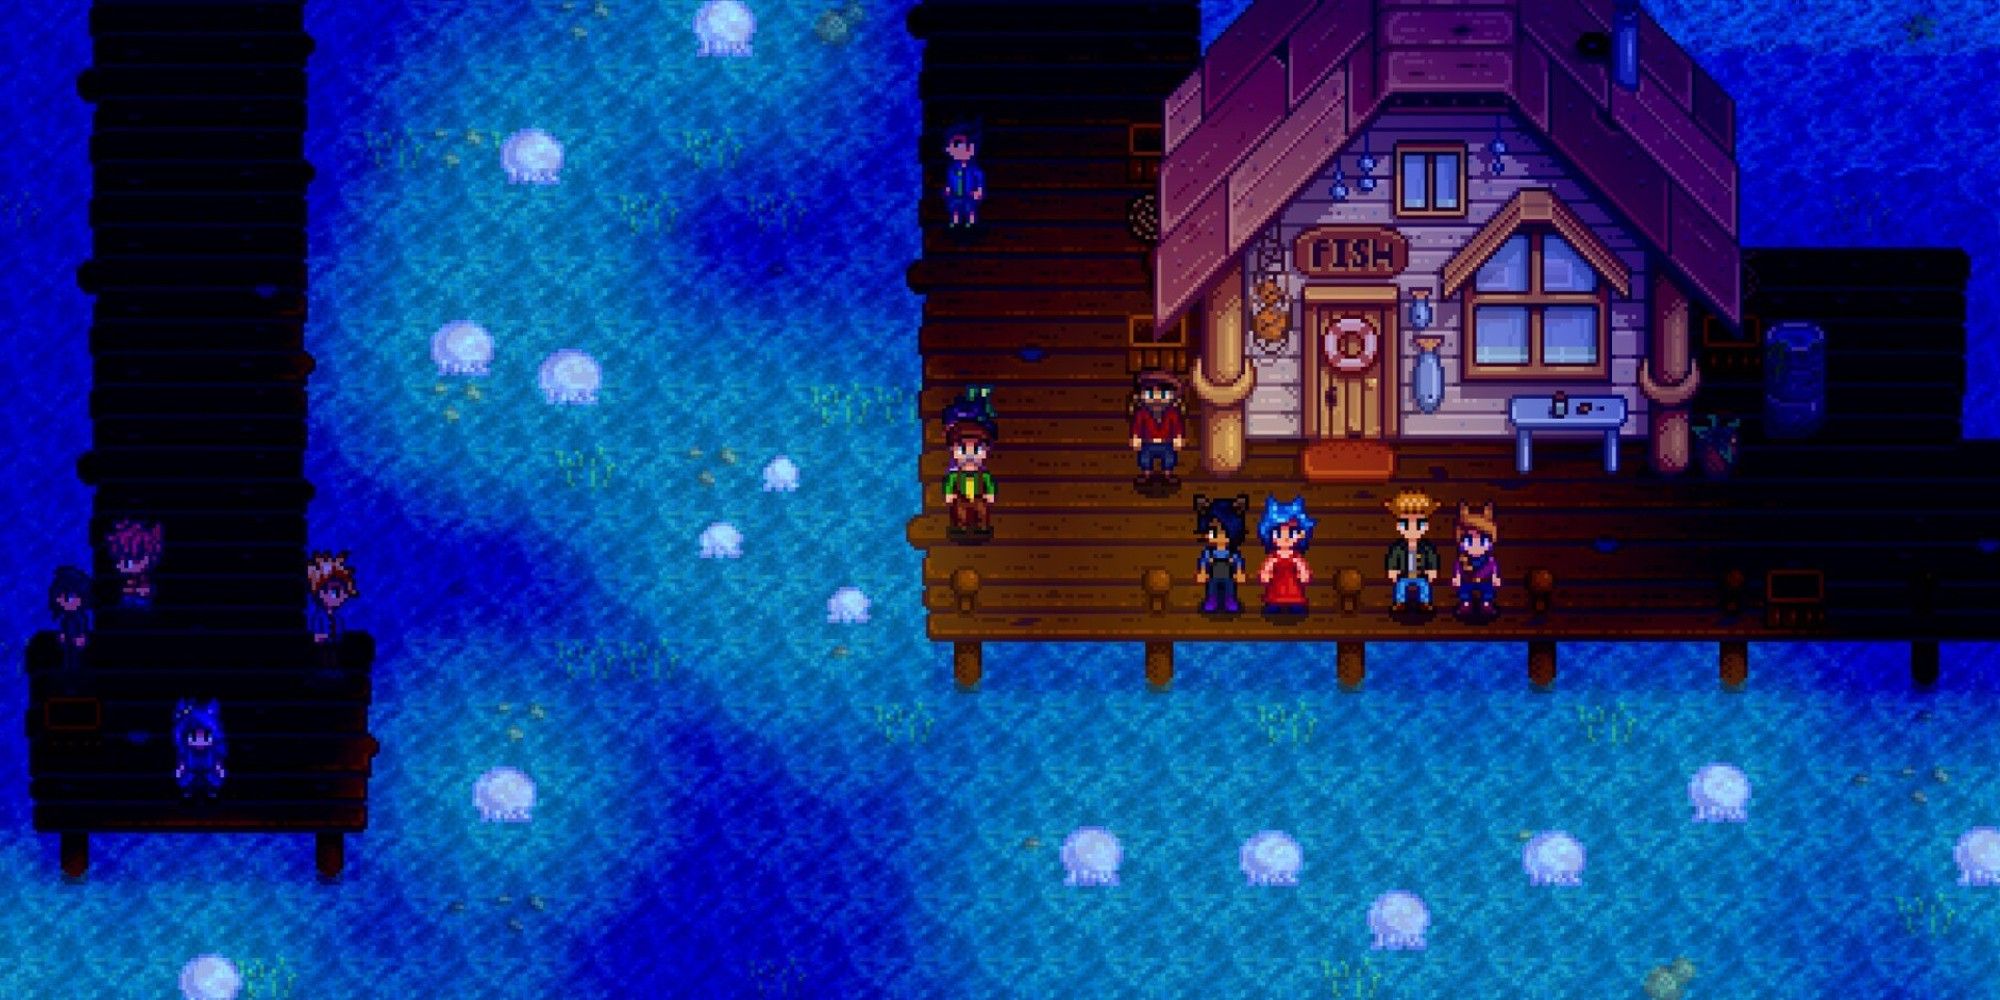 player viewing moonlight jellies next to emily